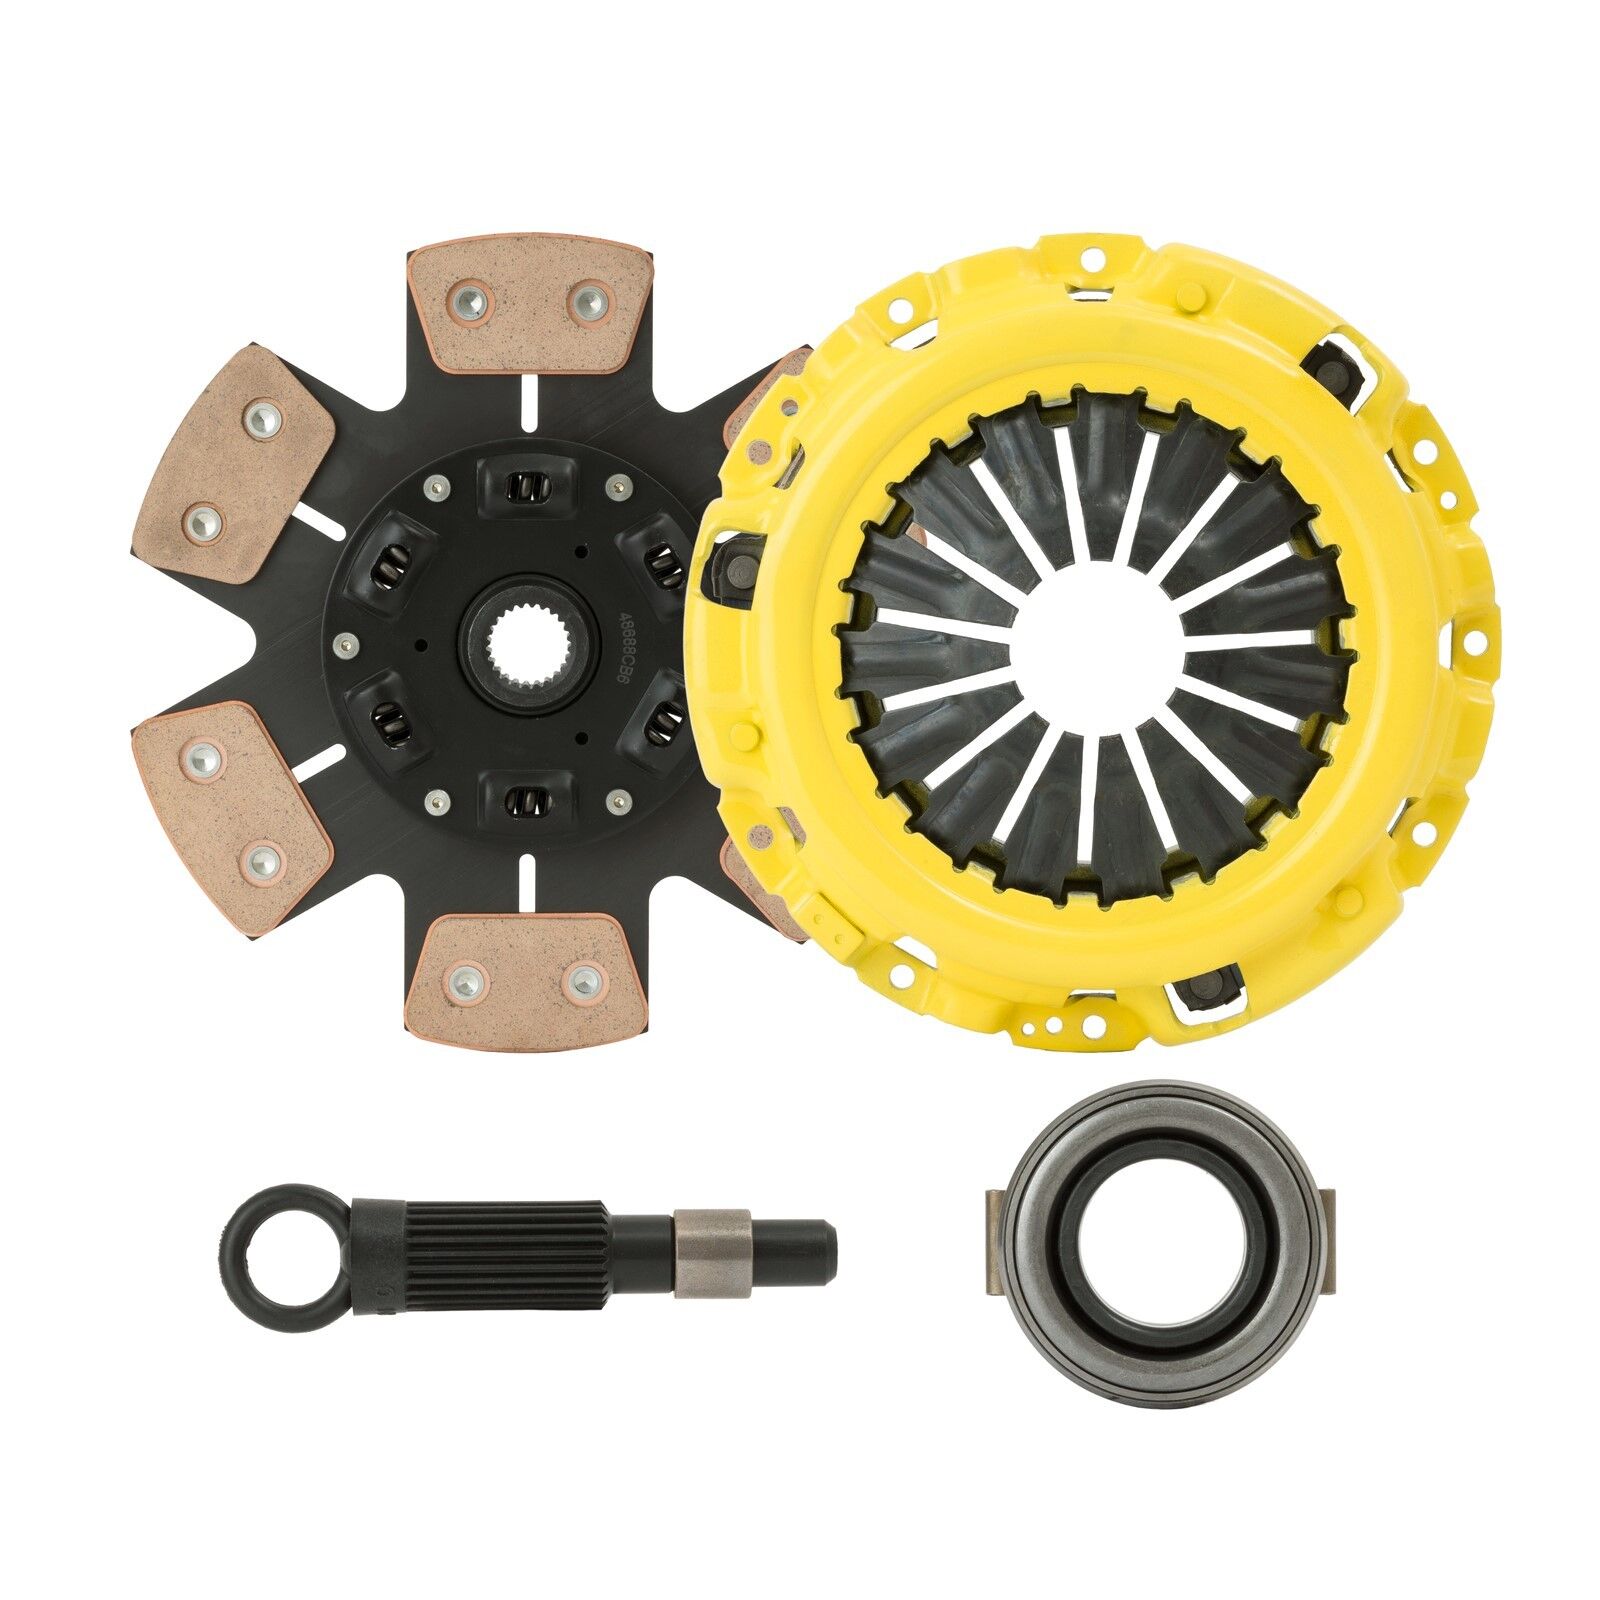 STAGE 3 RACING CLUTCH KIT fits 02-03 MITSUBISHI LANCER OZ-RALLY EDITION by CXP